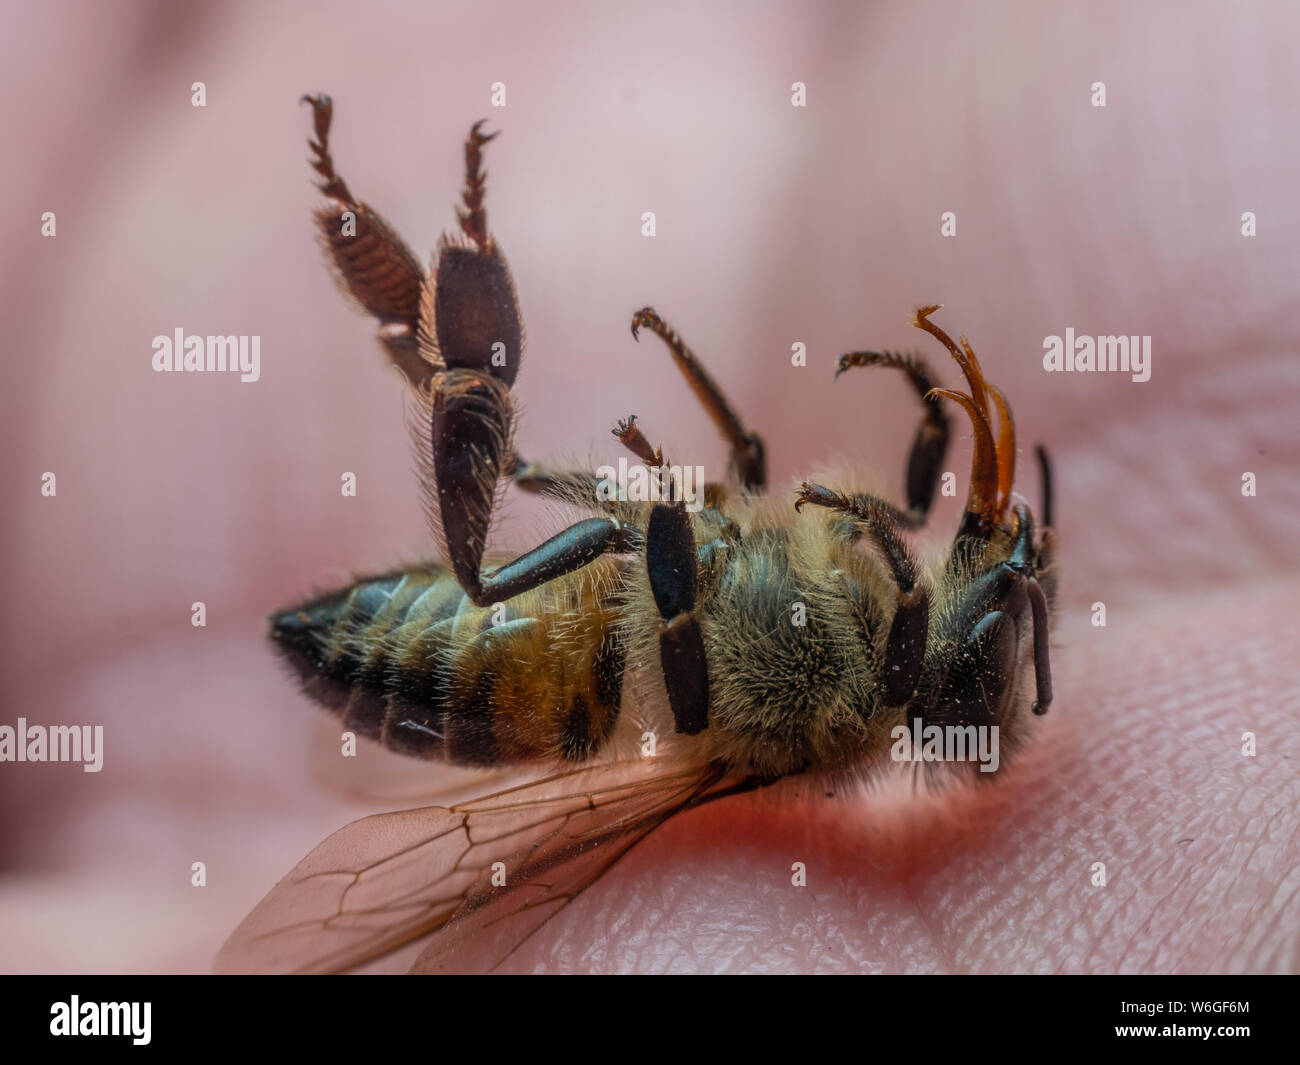 Extreme macro of a deceased bee with legs up on human hand, illustrates honey bee mortality Stock Photo